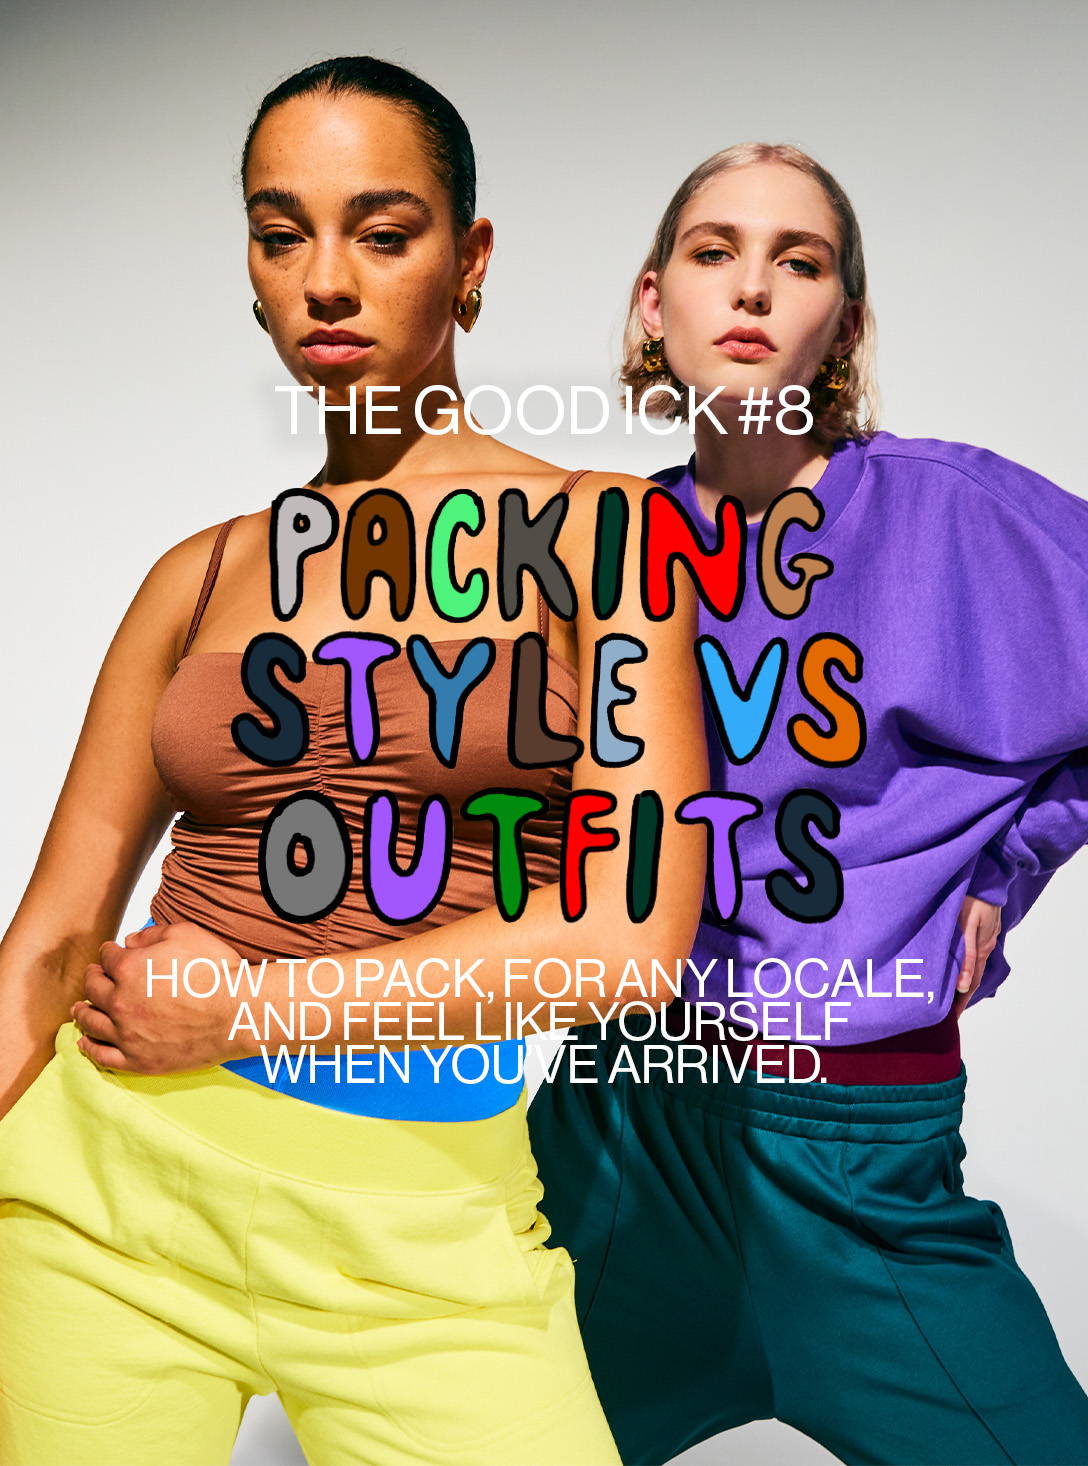 Packing Style vs Outfits, Good Ick #8